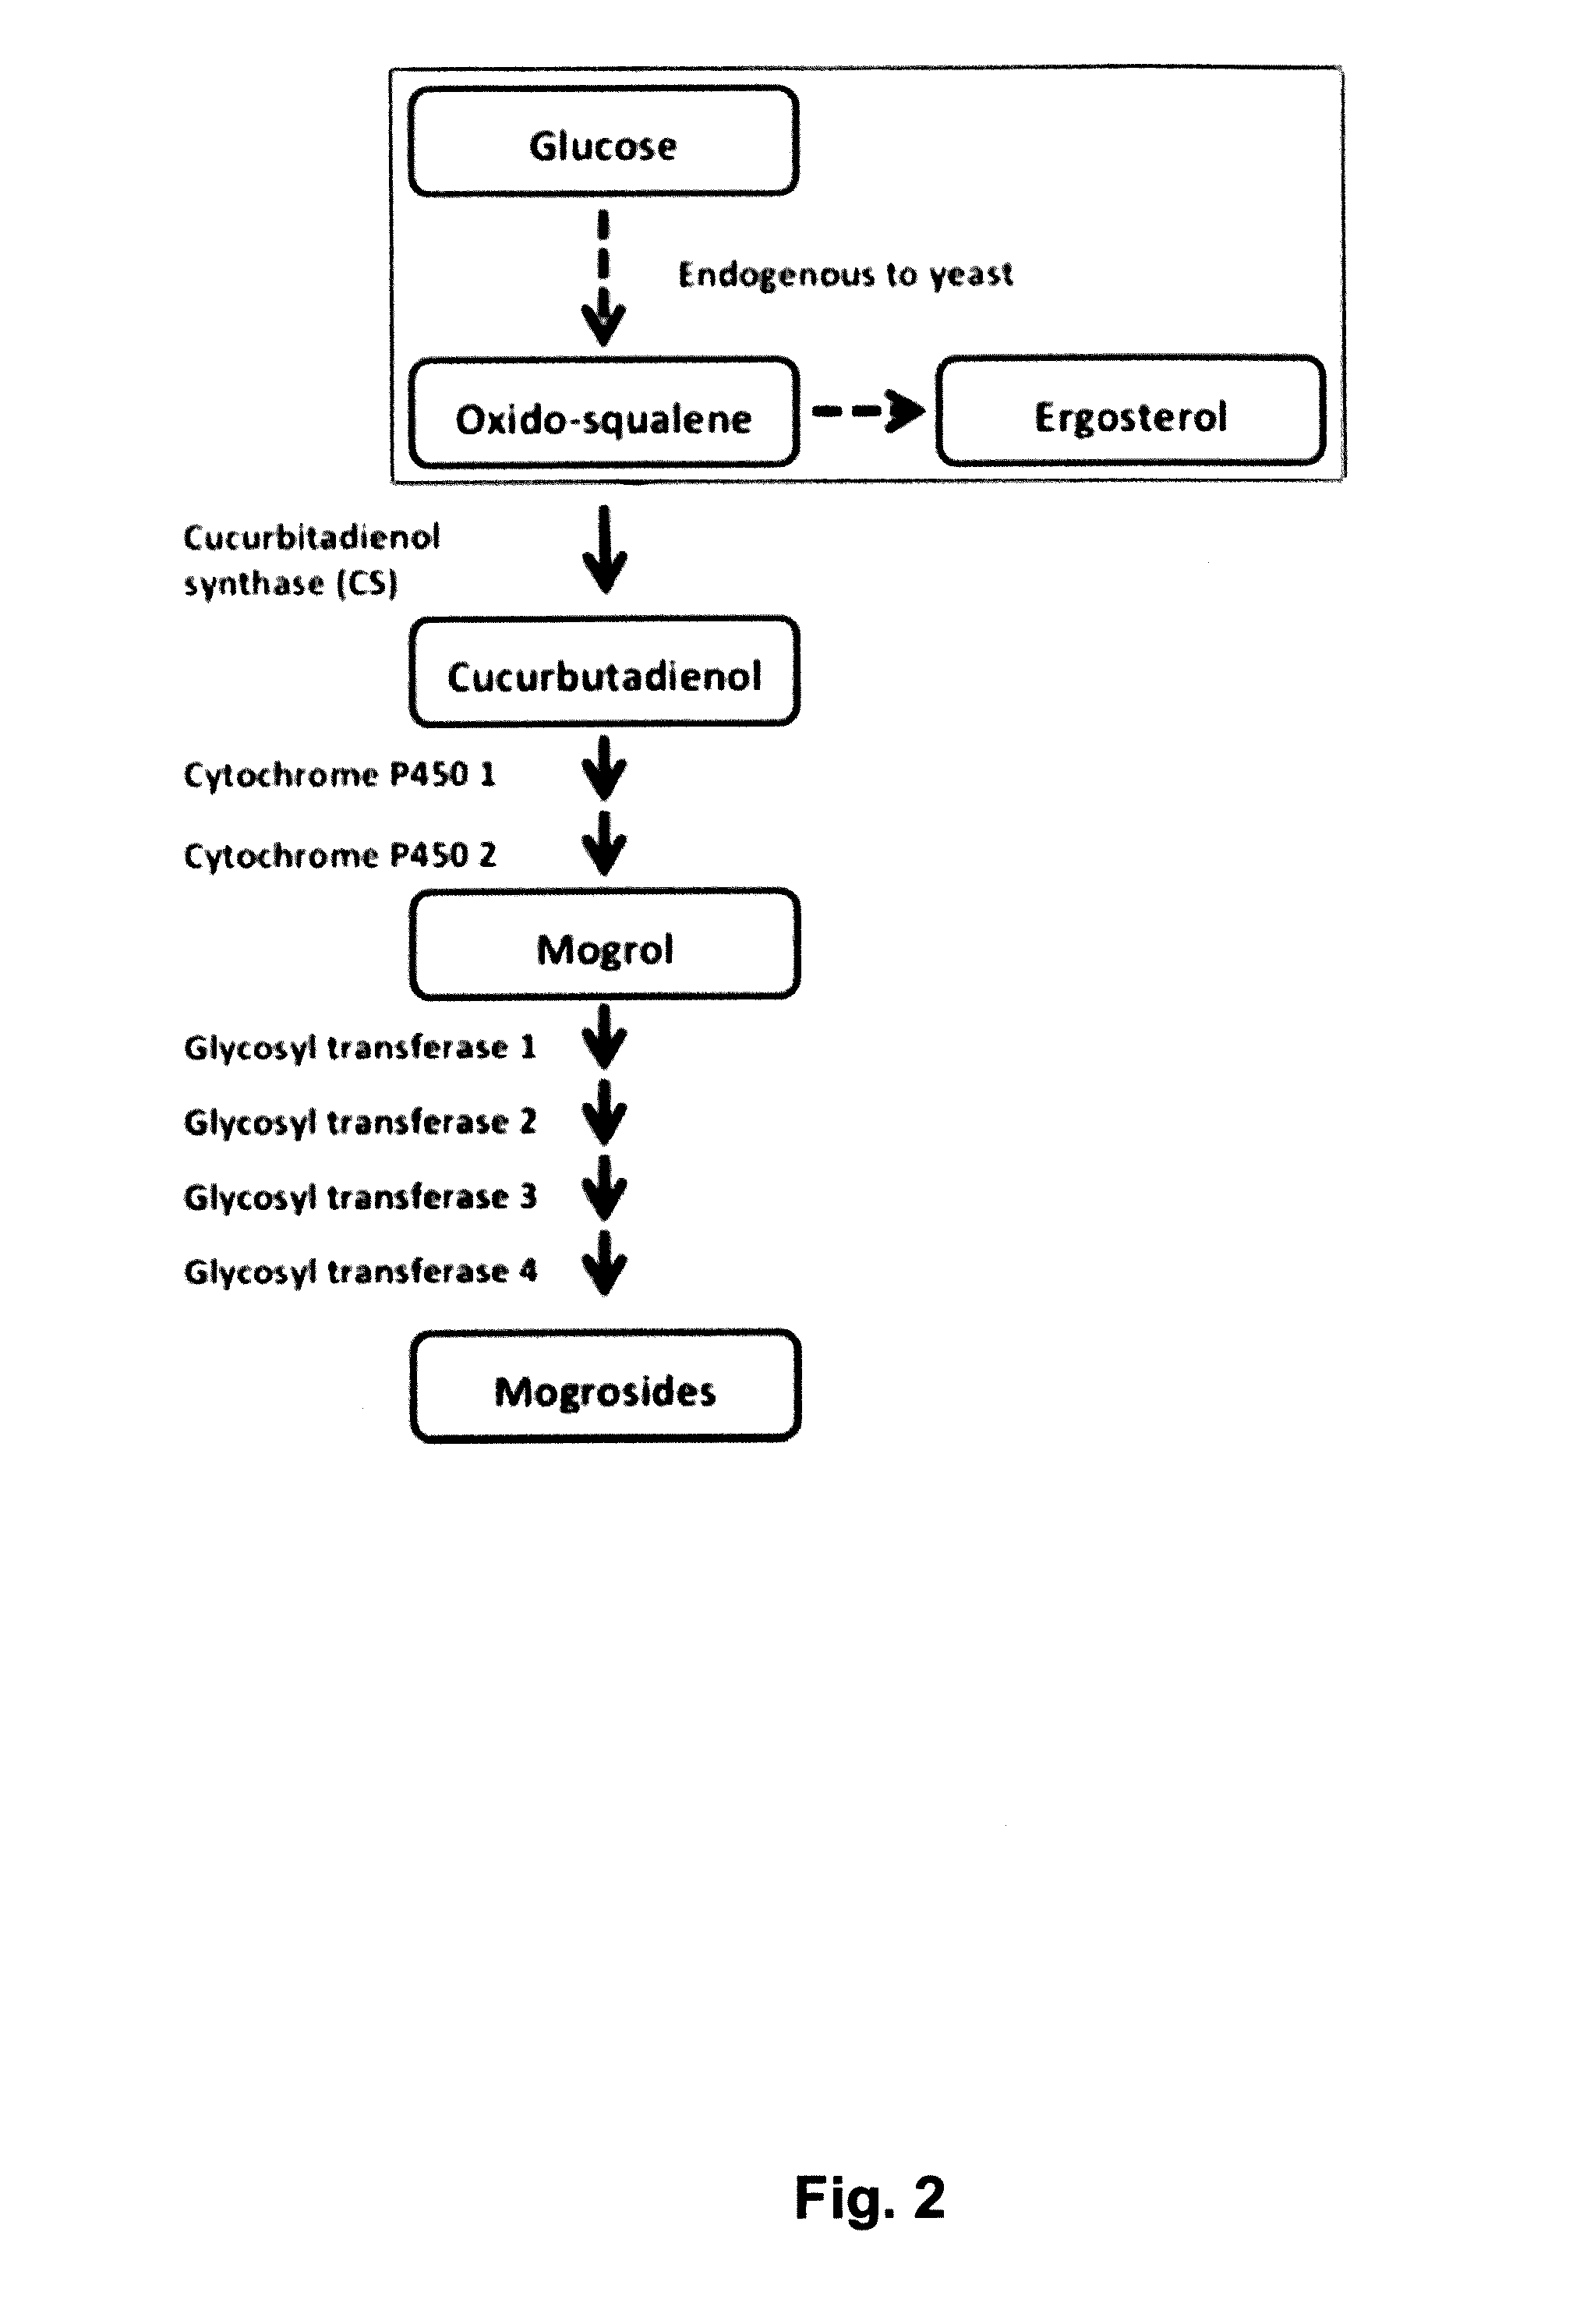 Methods and materials for Biosynthesis of Mogroside Compounds